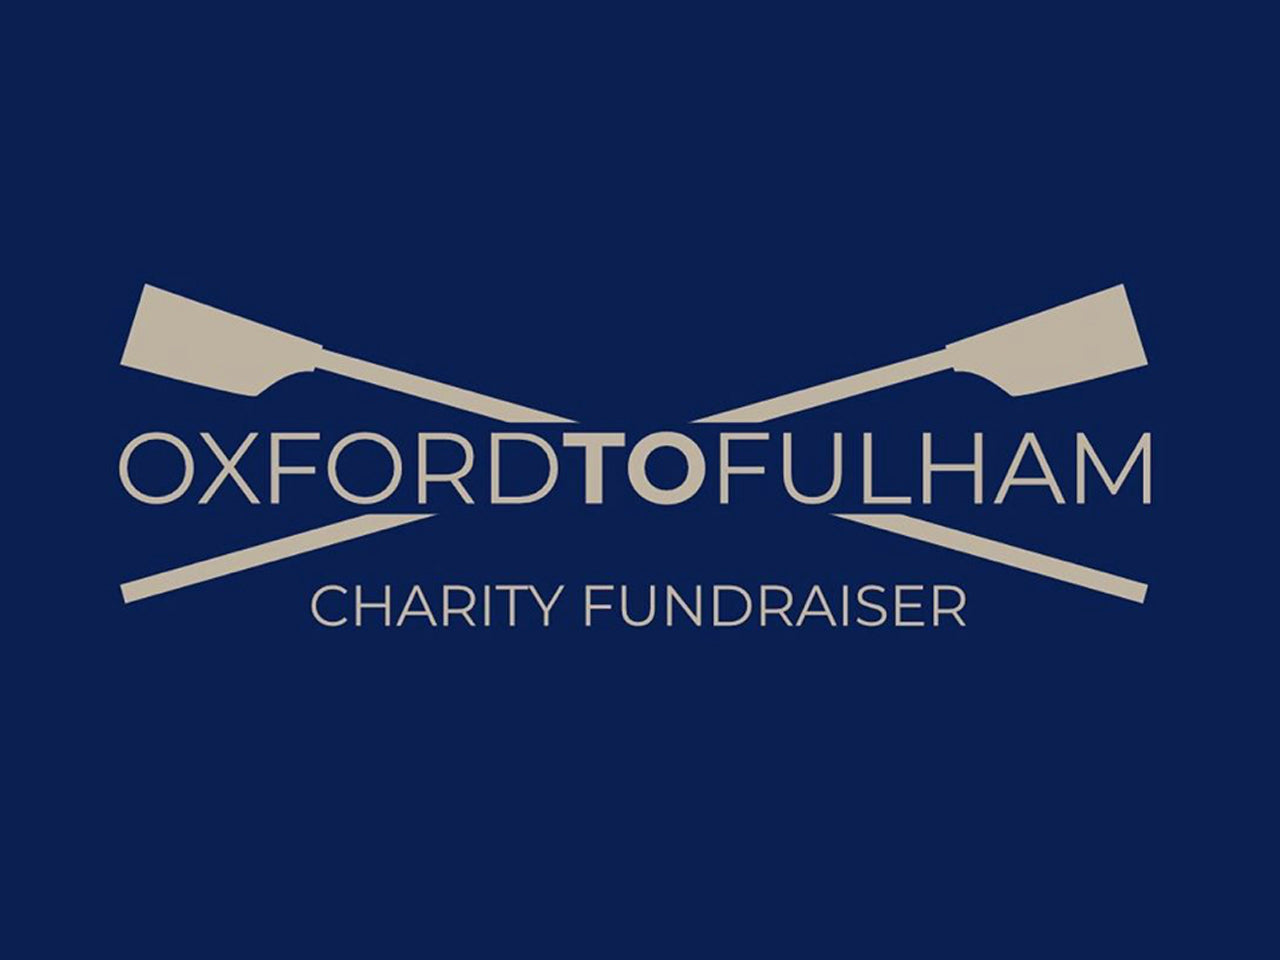 Oxford to Fulham - Oxford University Boat Clubs